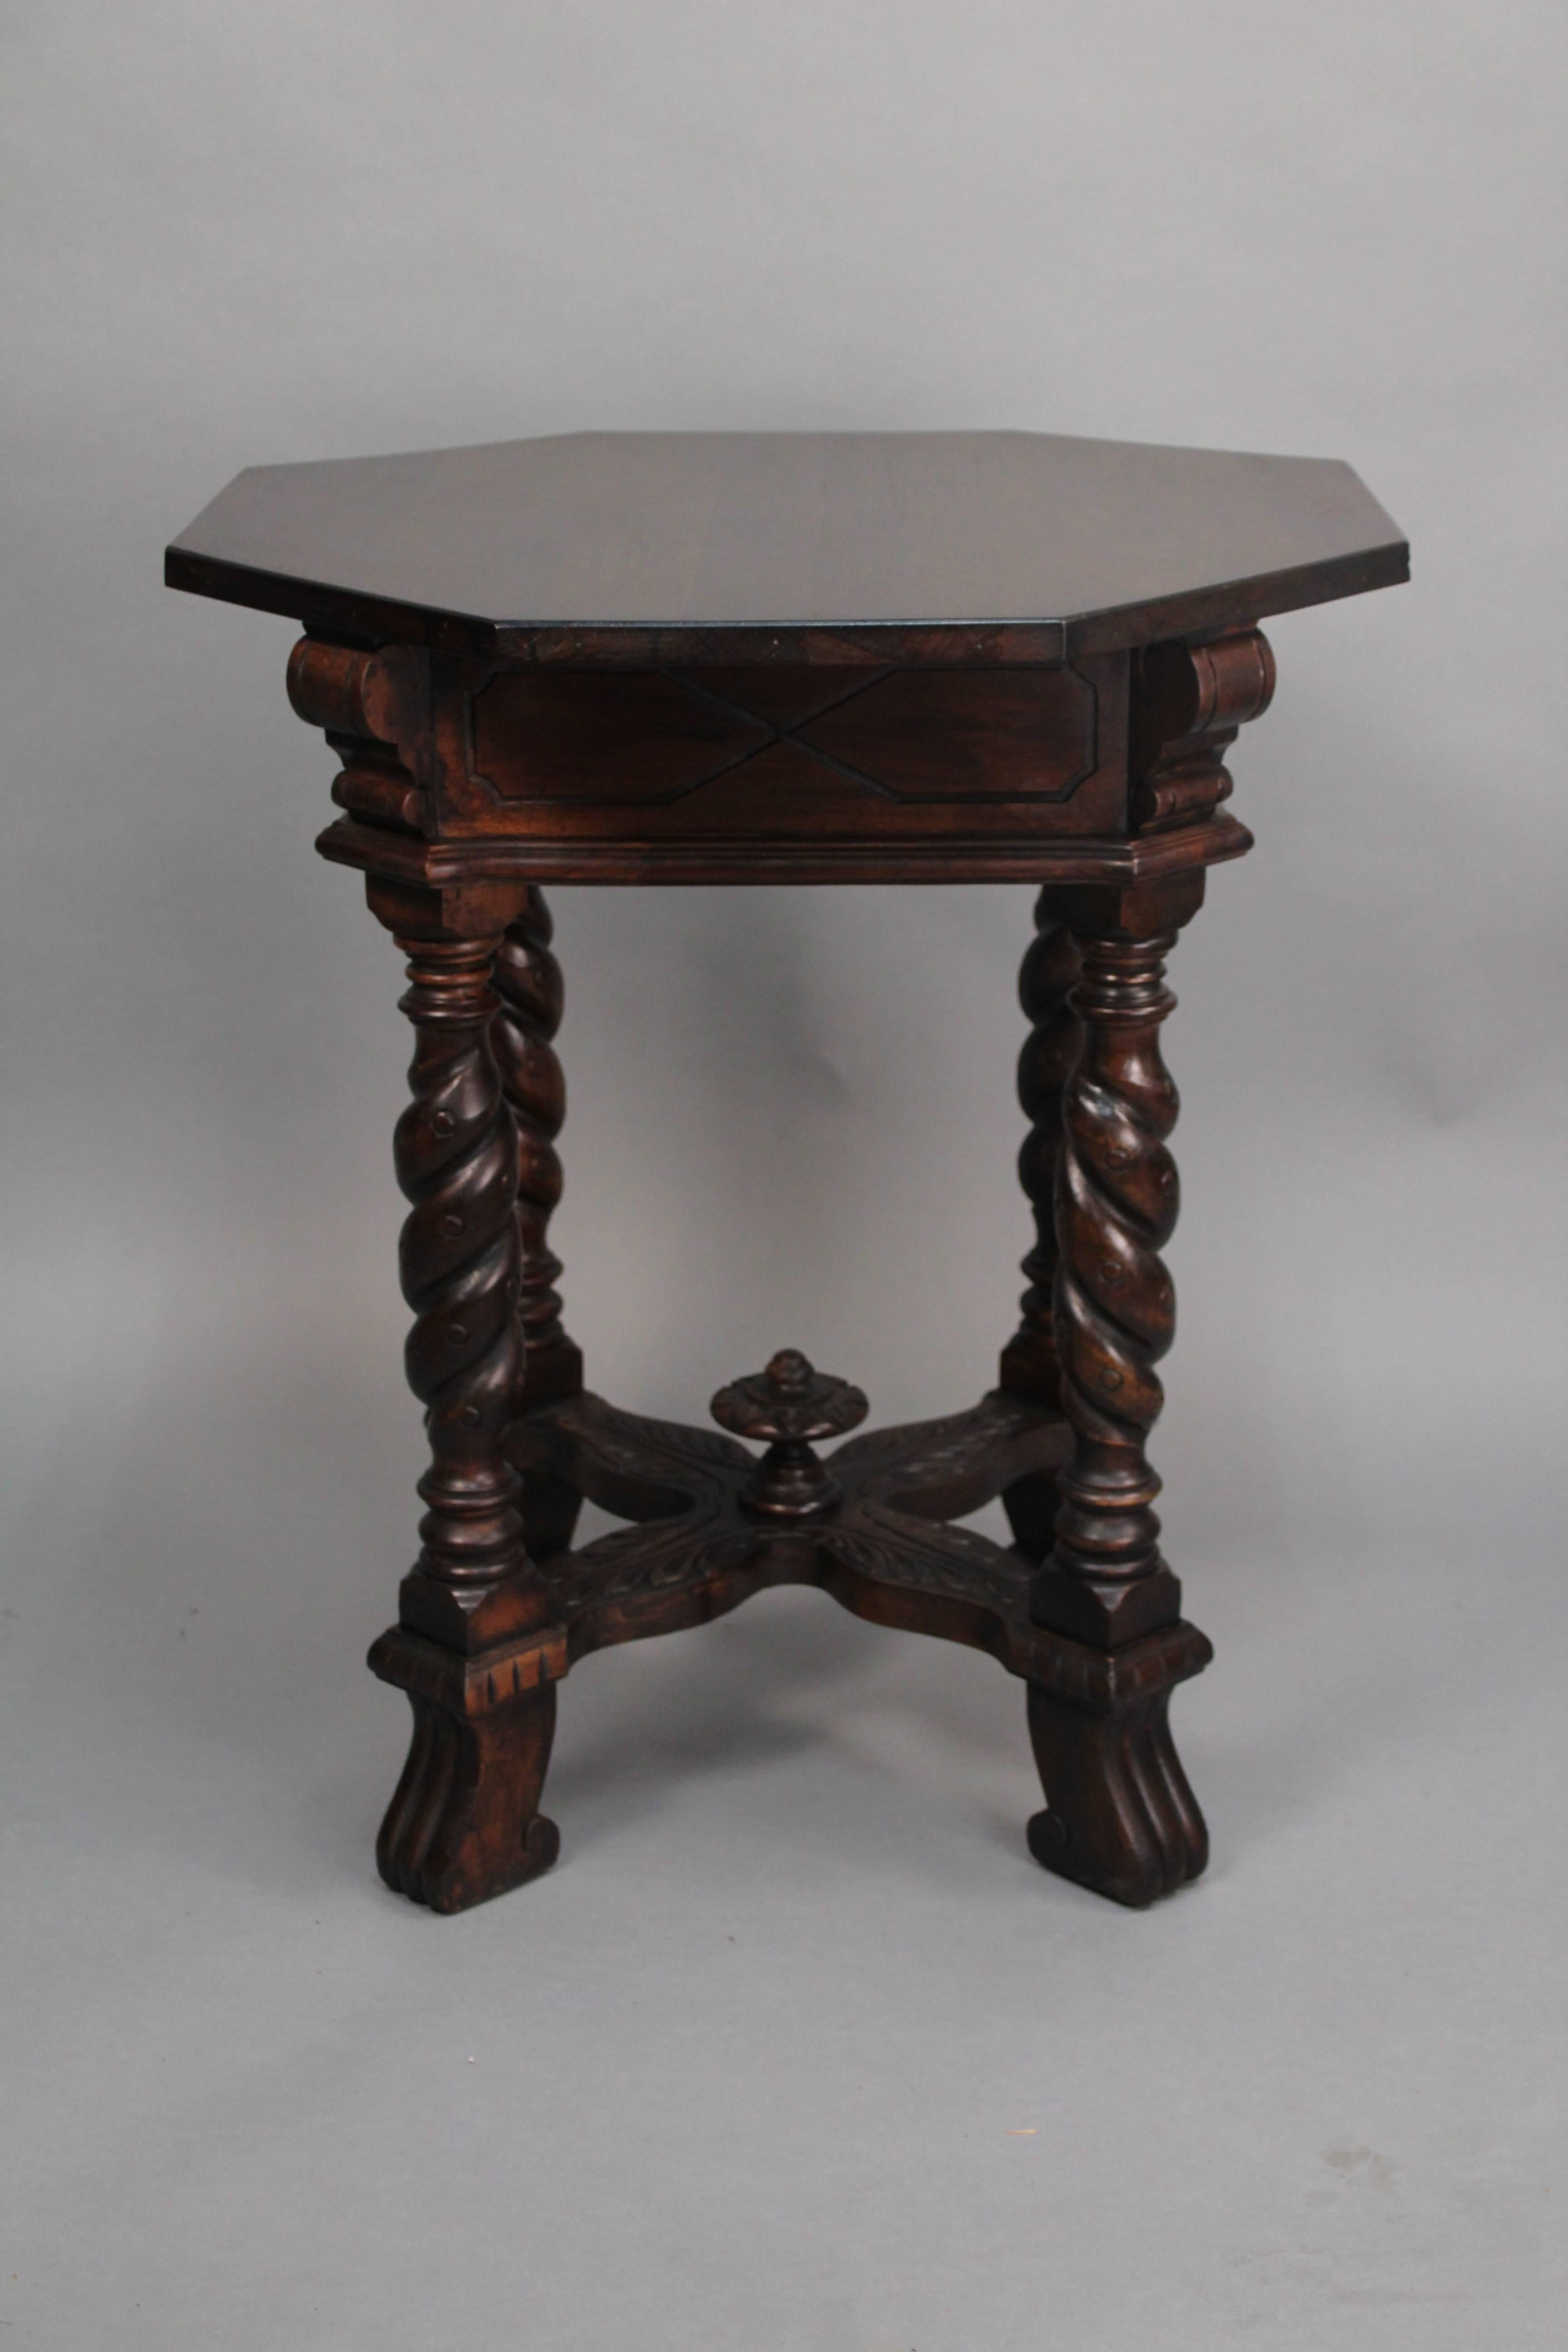 Spanish Colonial Spanish Revival Octogonal Walnut 1920s Side Table with Turned Legs